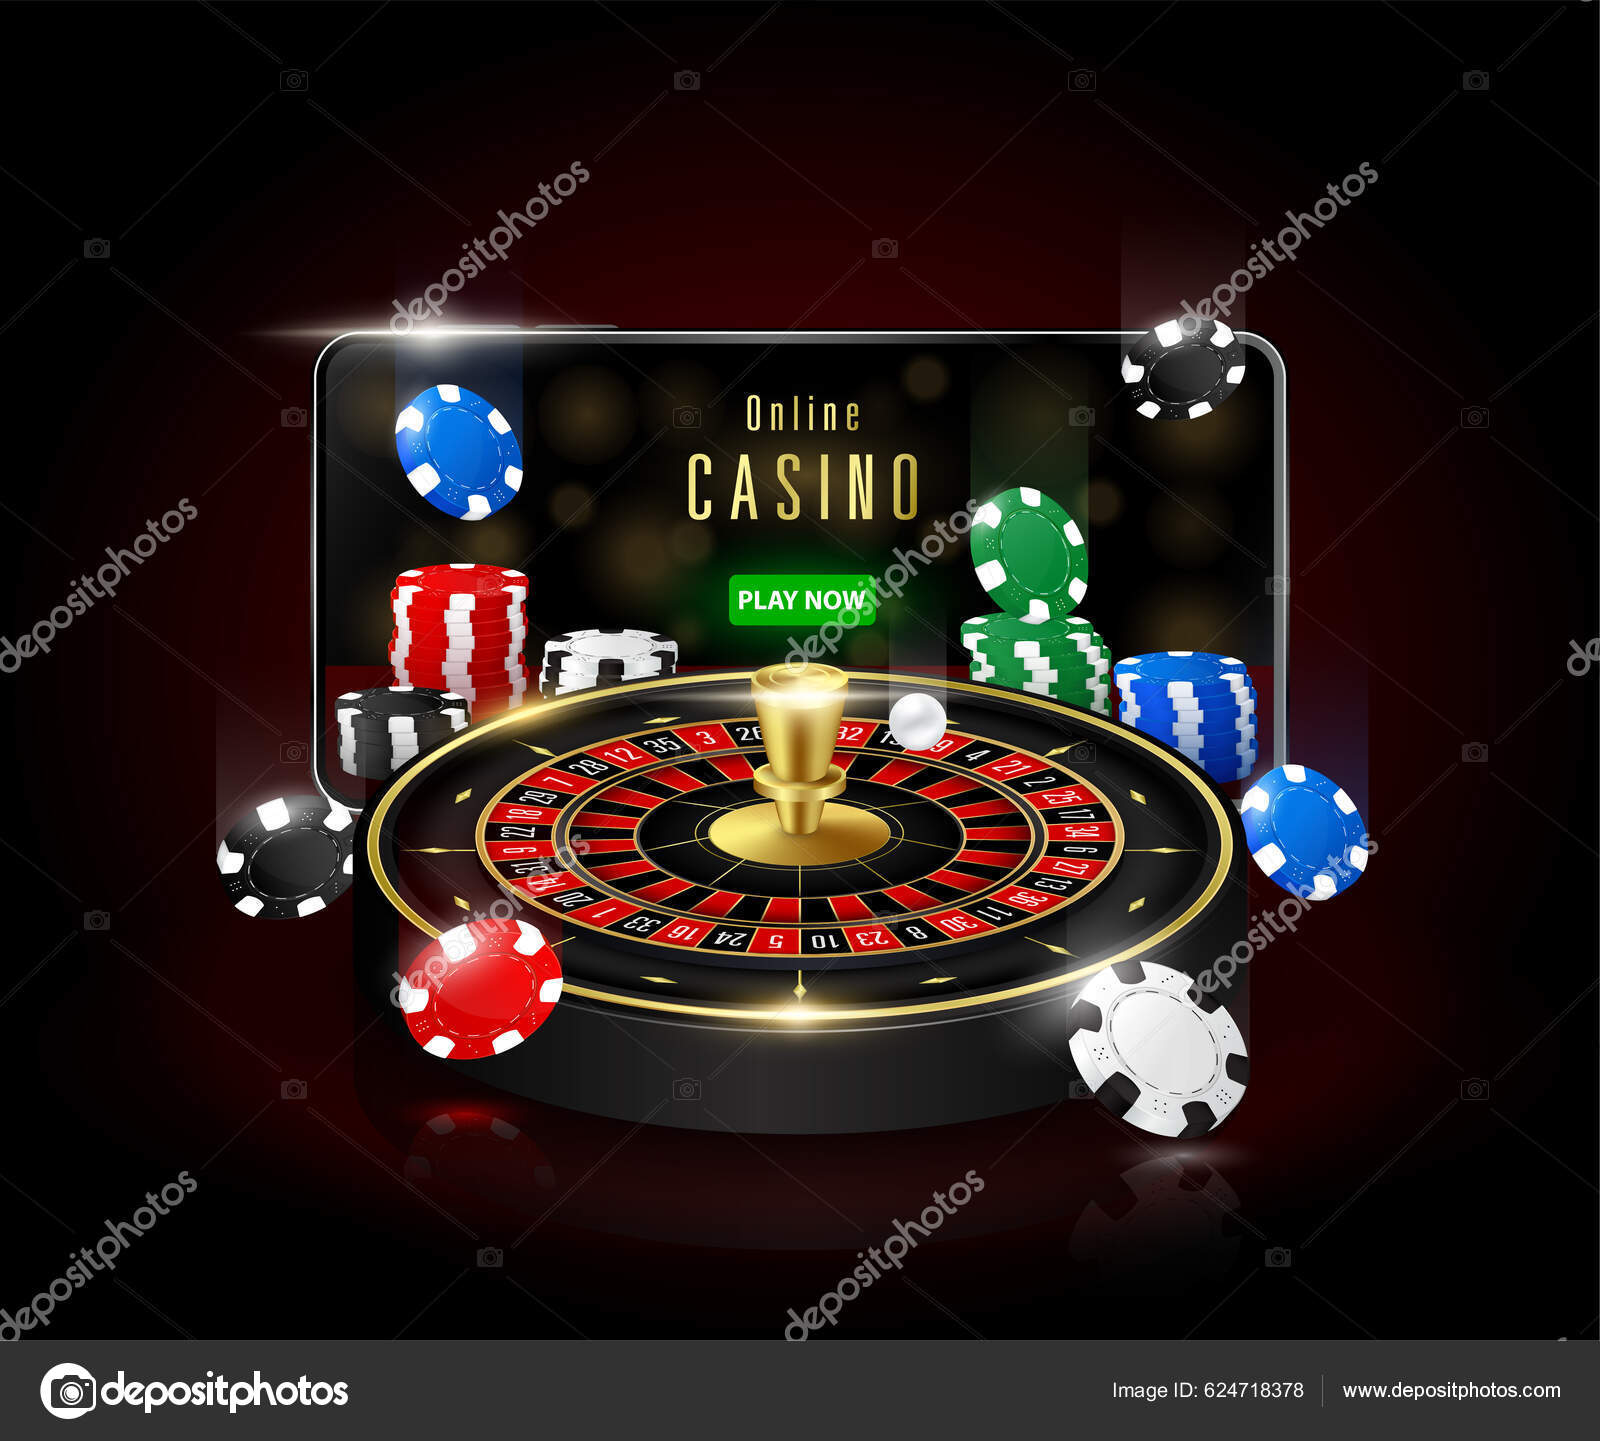 How To Get Fabulous BC Game Online Casino: A Gateway to Endless Fun On A Tight Budget